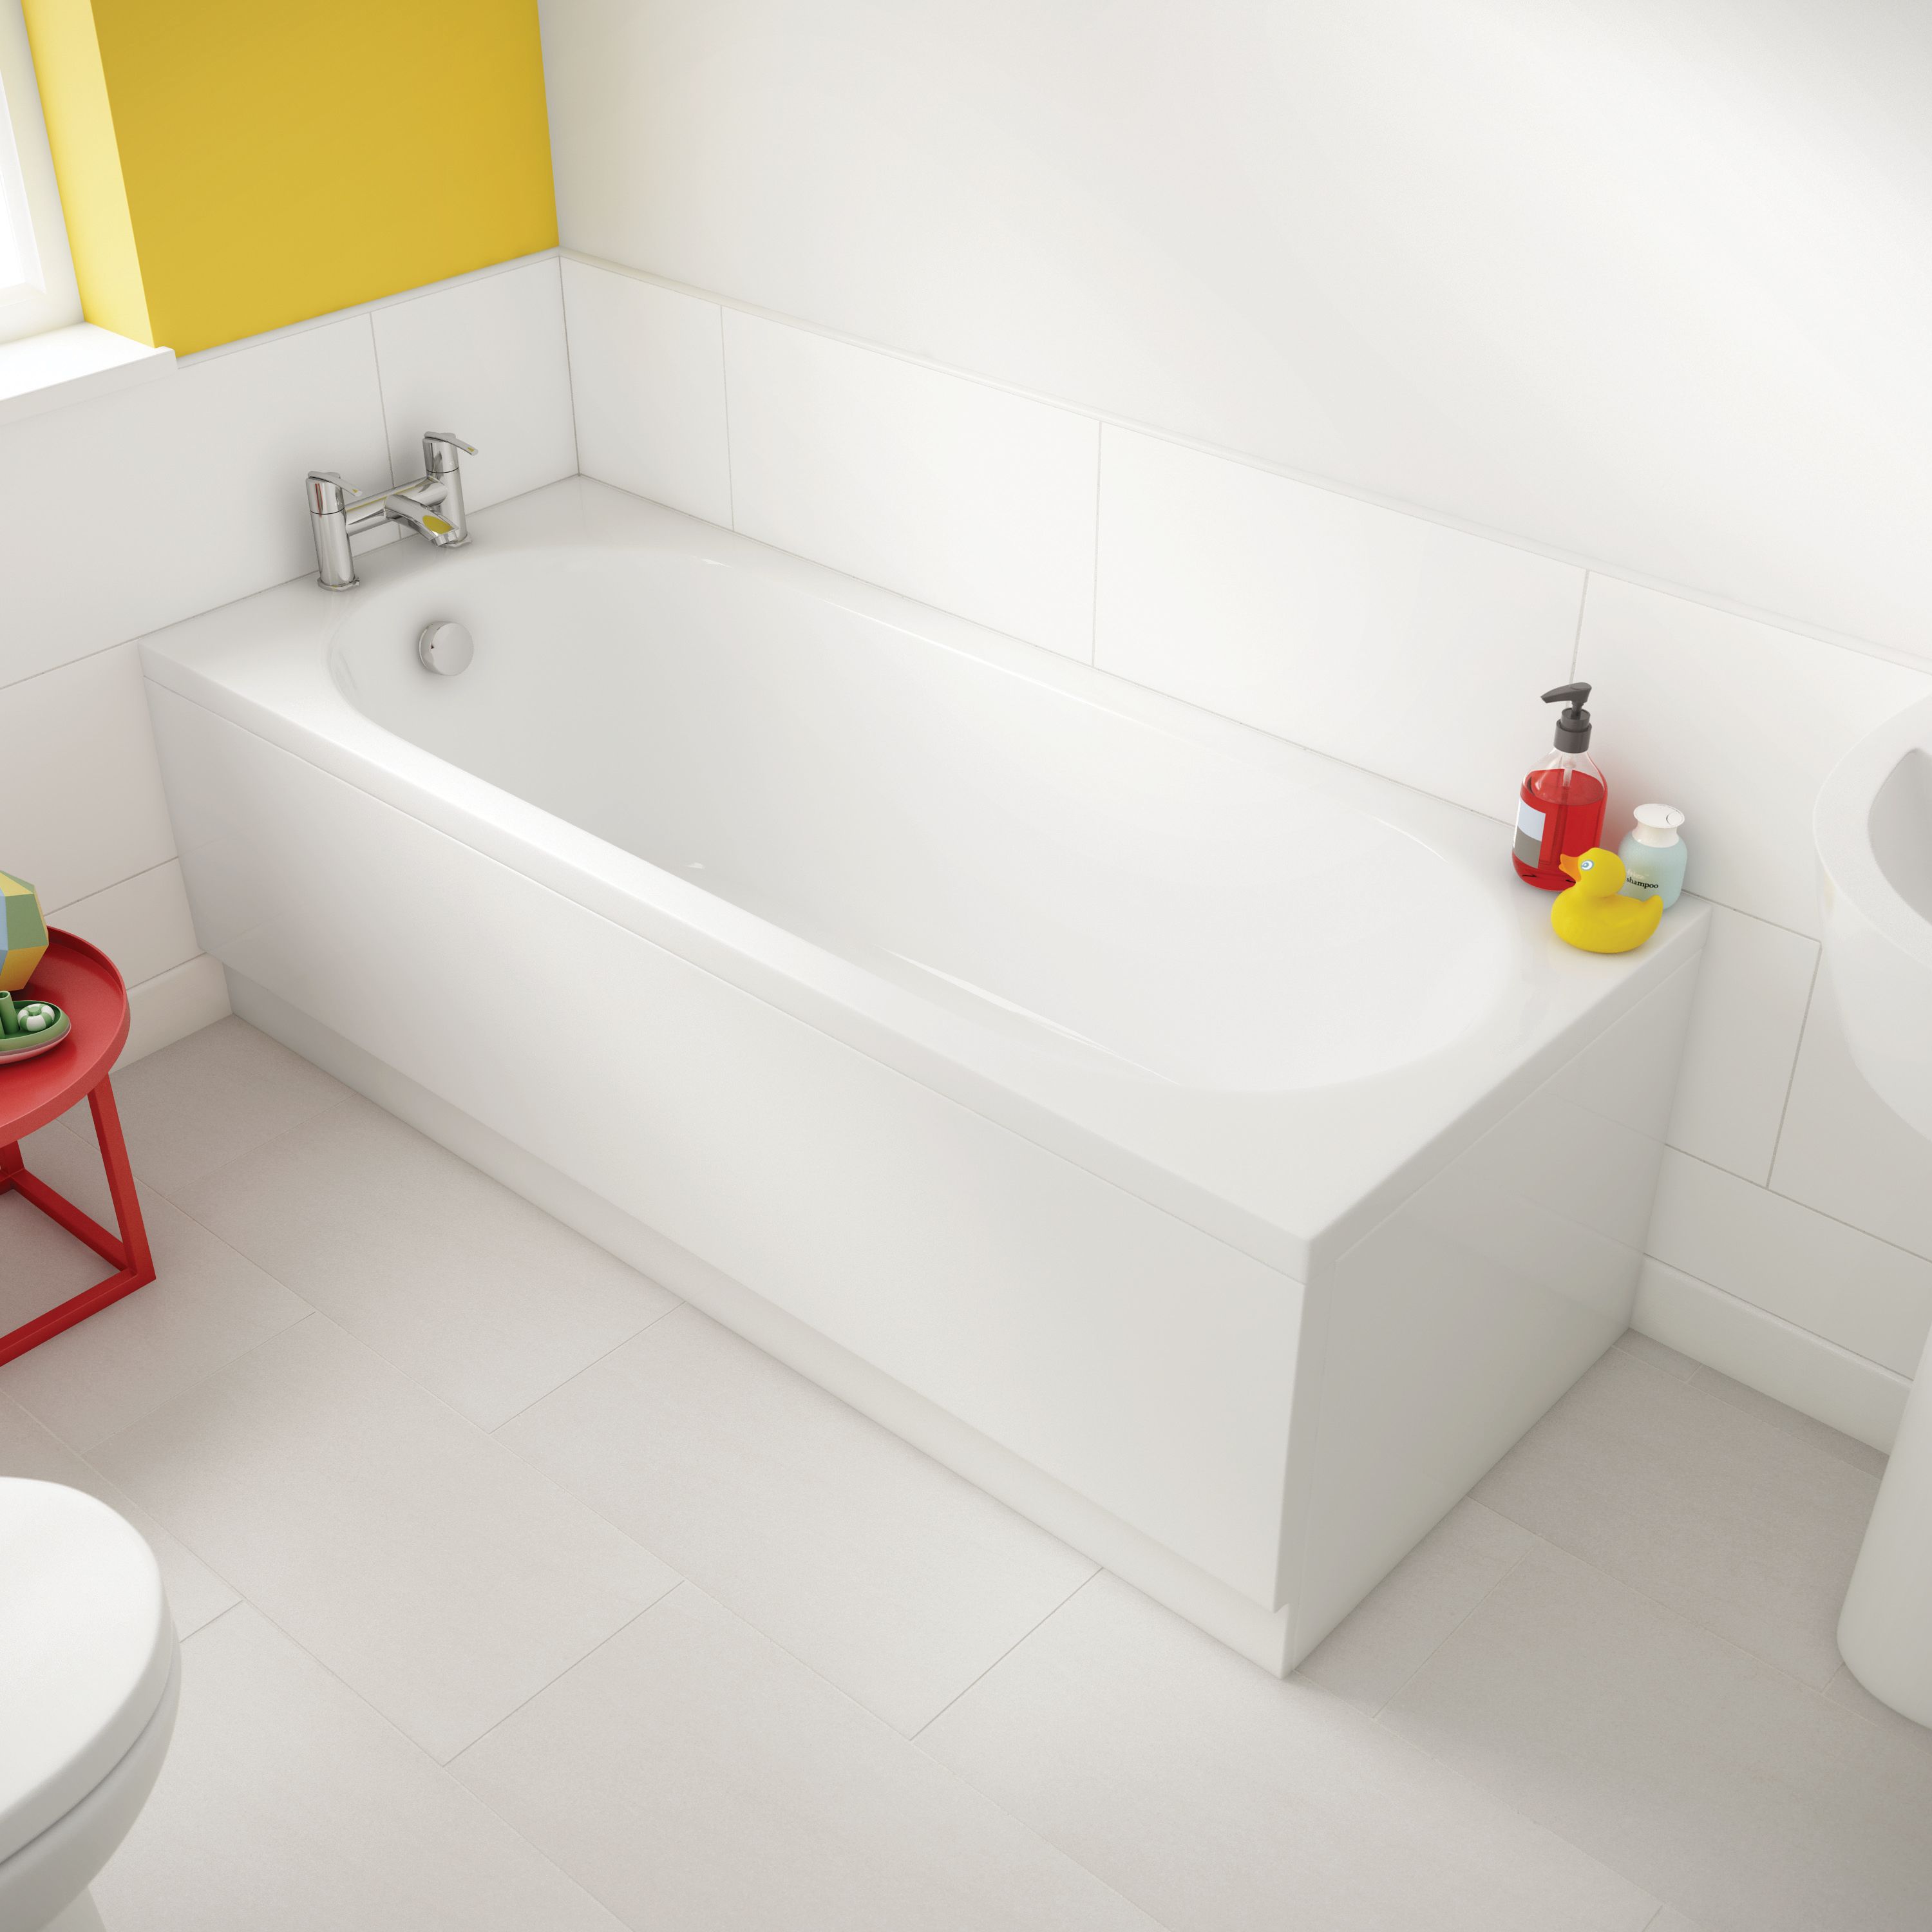 Image of Wickes Forenza Straight Reinforced Bath - 1700 x 700mm